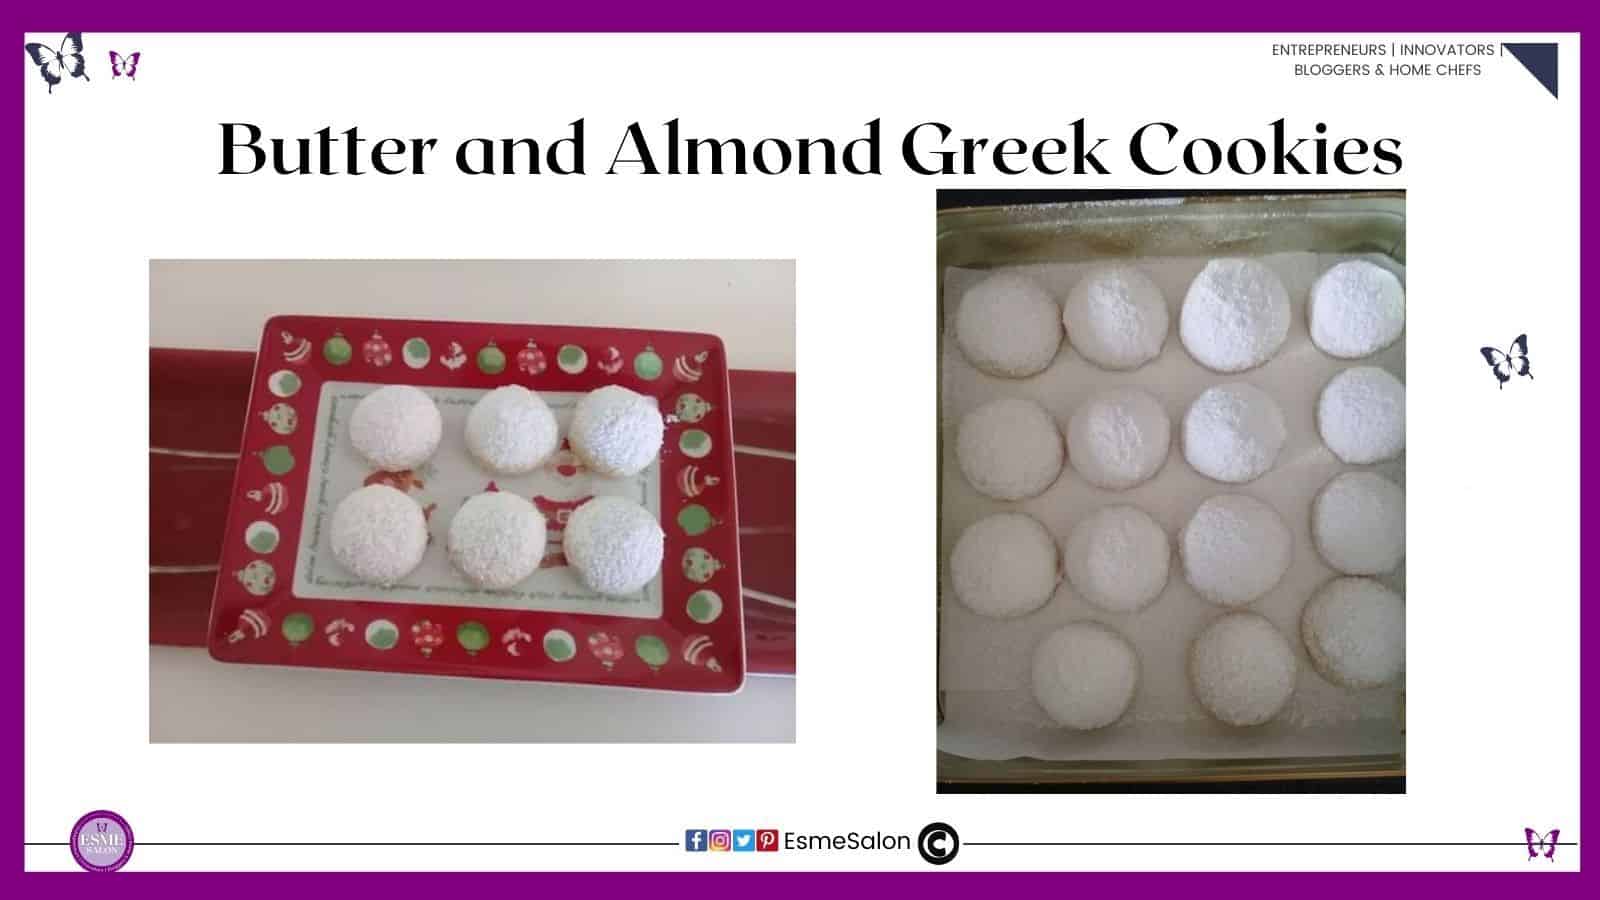 an image of a red Christmas platter with 6 Butter and Almond Greek Cookies as well as some still on the baking tray